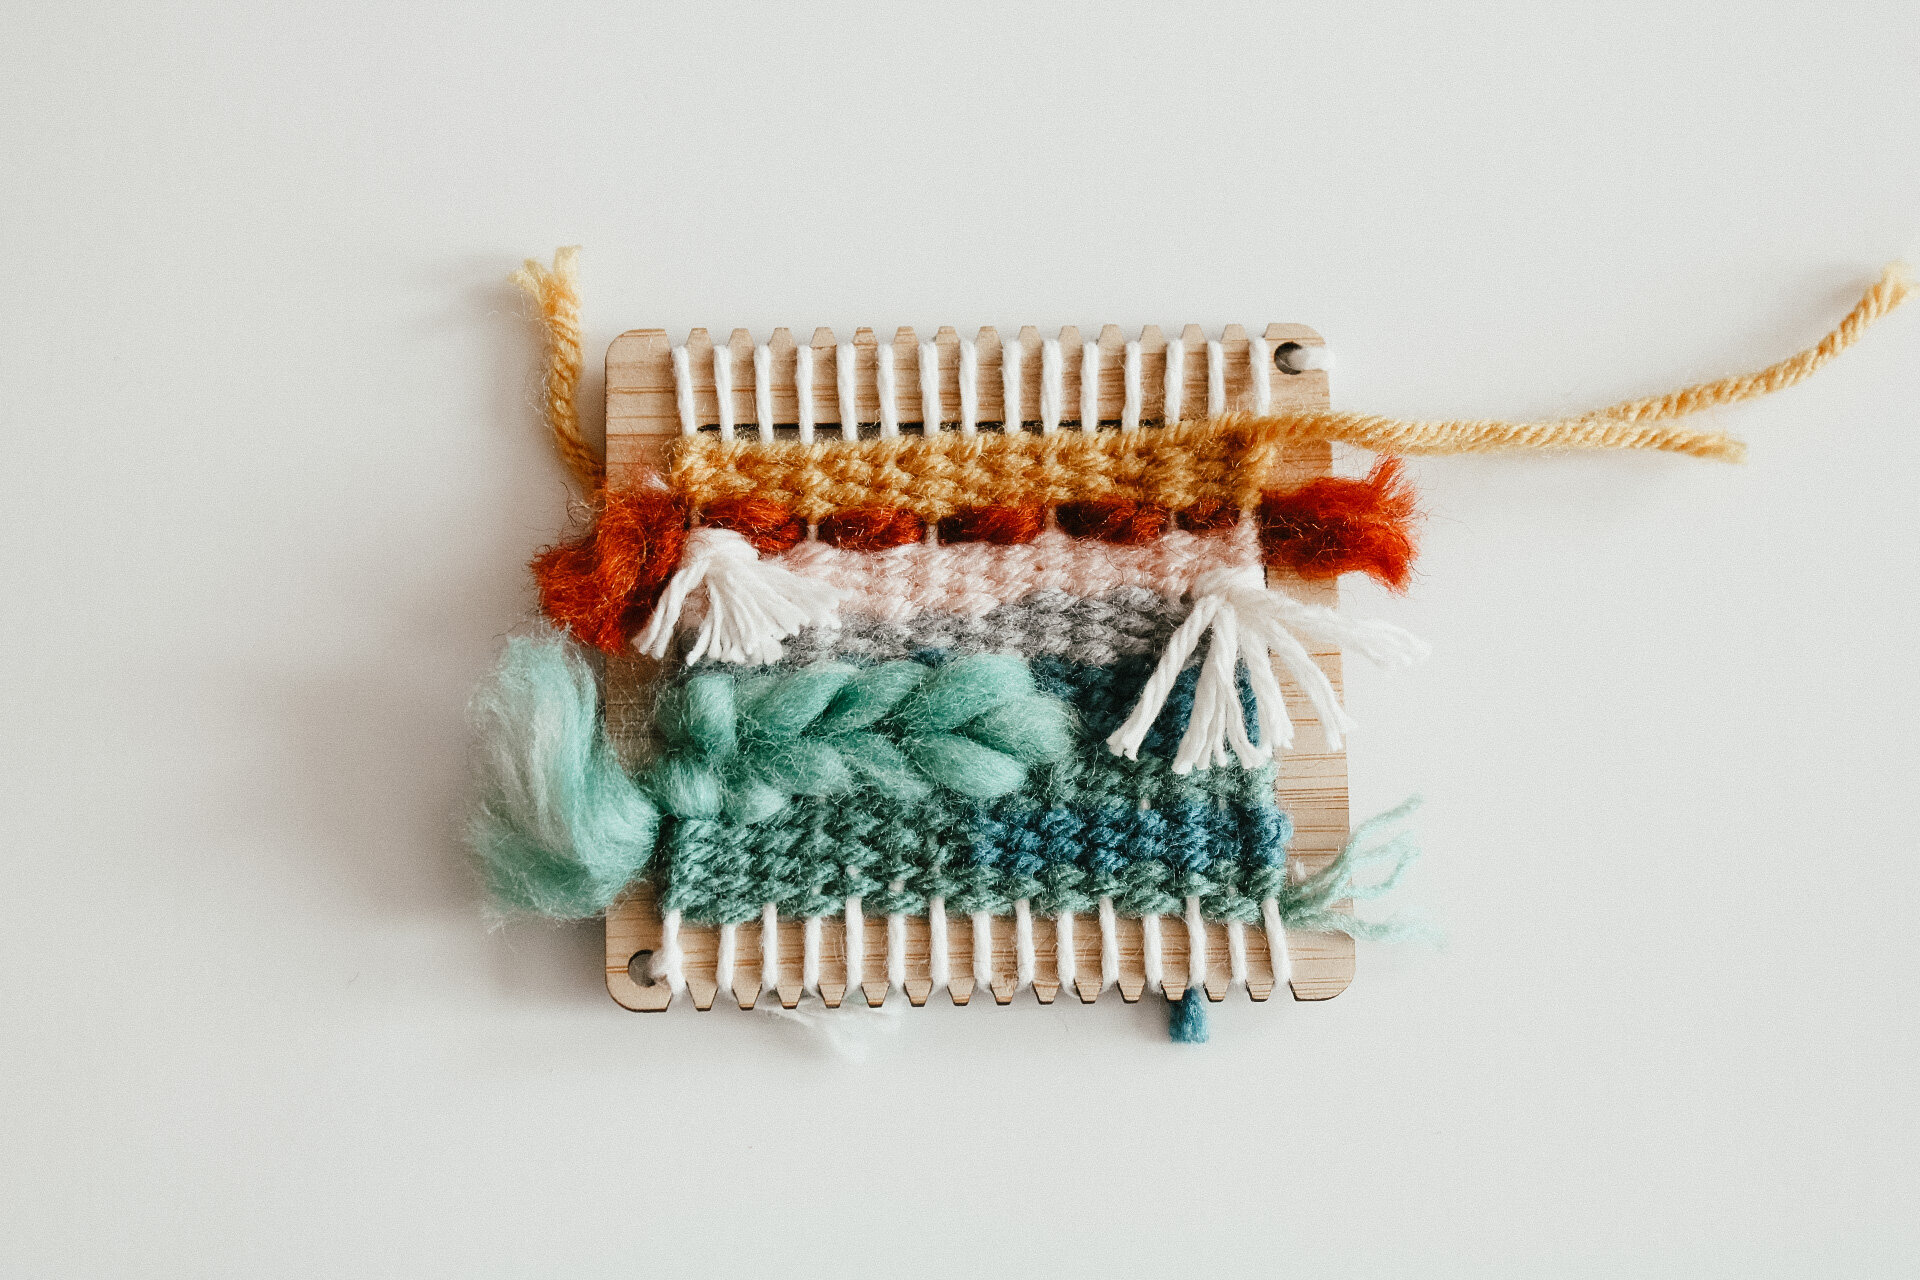 Tapestry Needles - Which Should You Use? - Warped Fibers